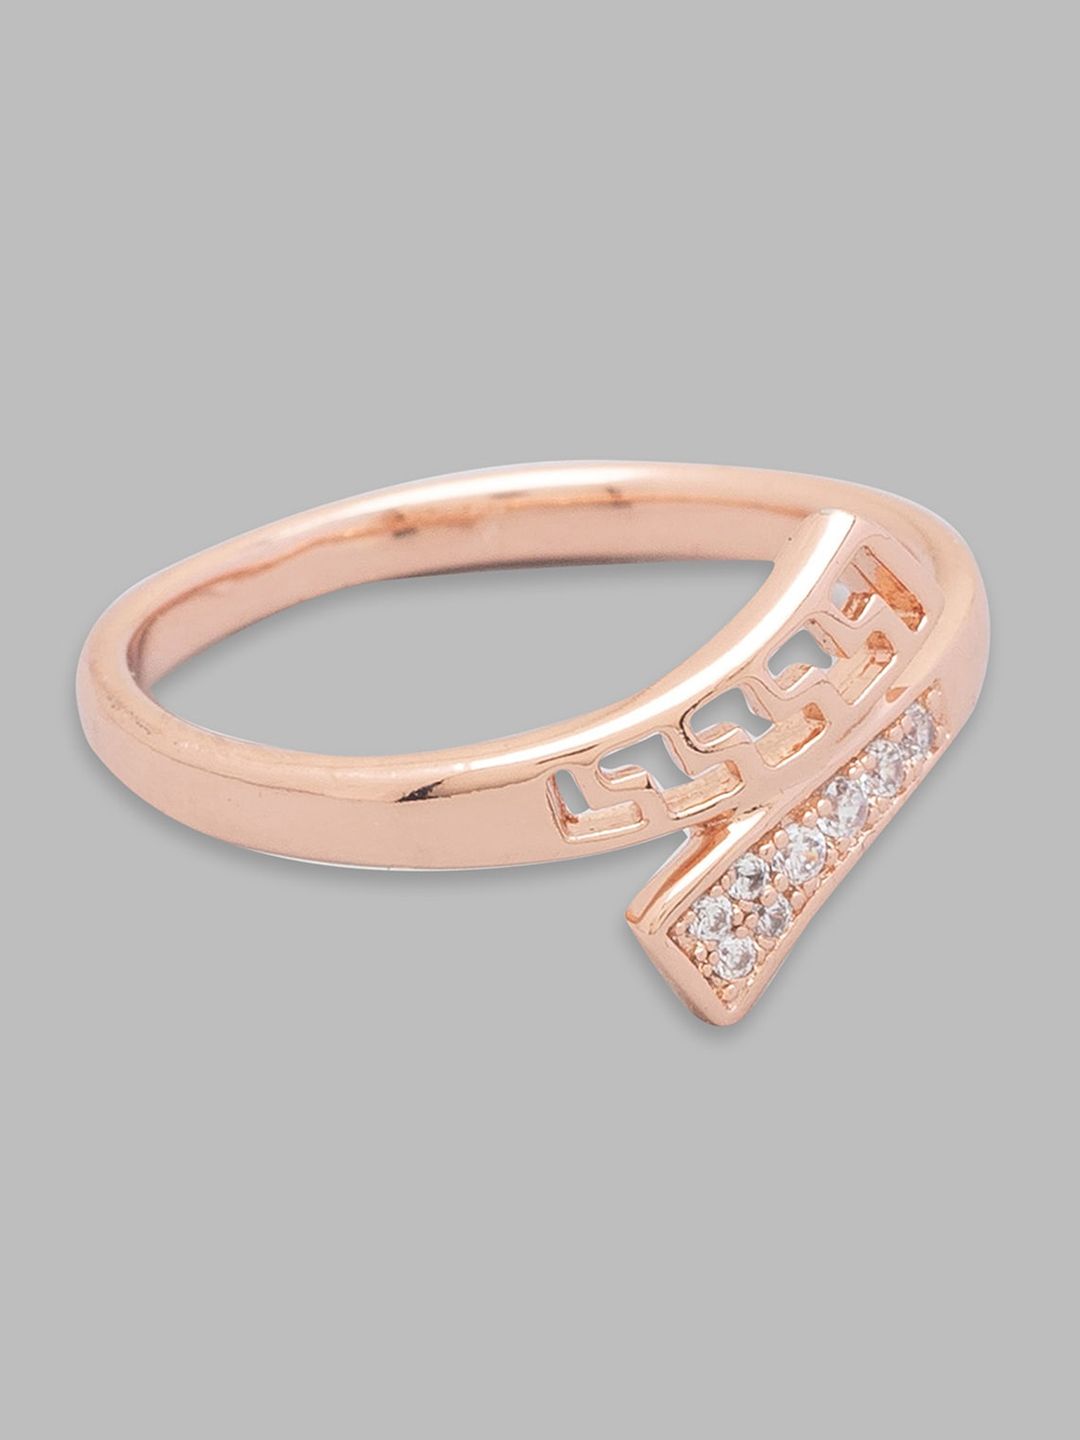 Globus Rose Gold-Plated & White CZ Stone-Studded Finger Ring Price in India